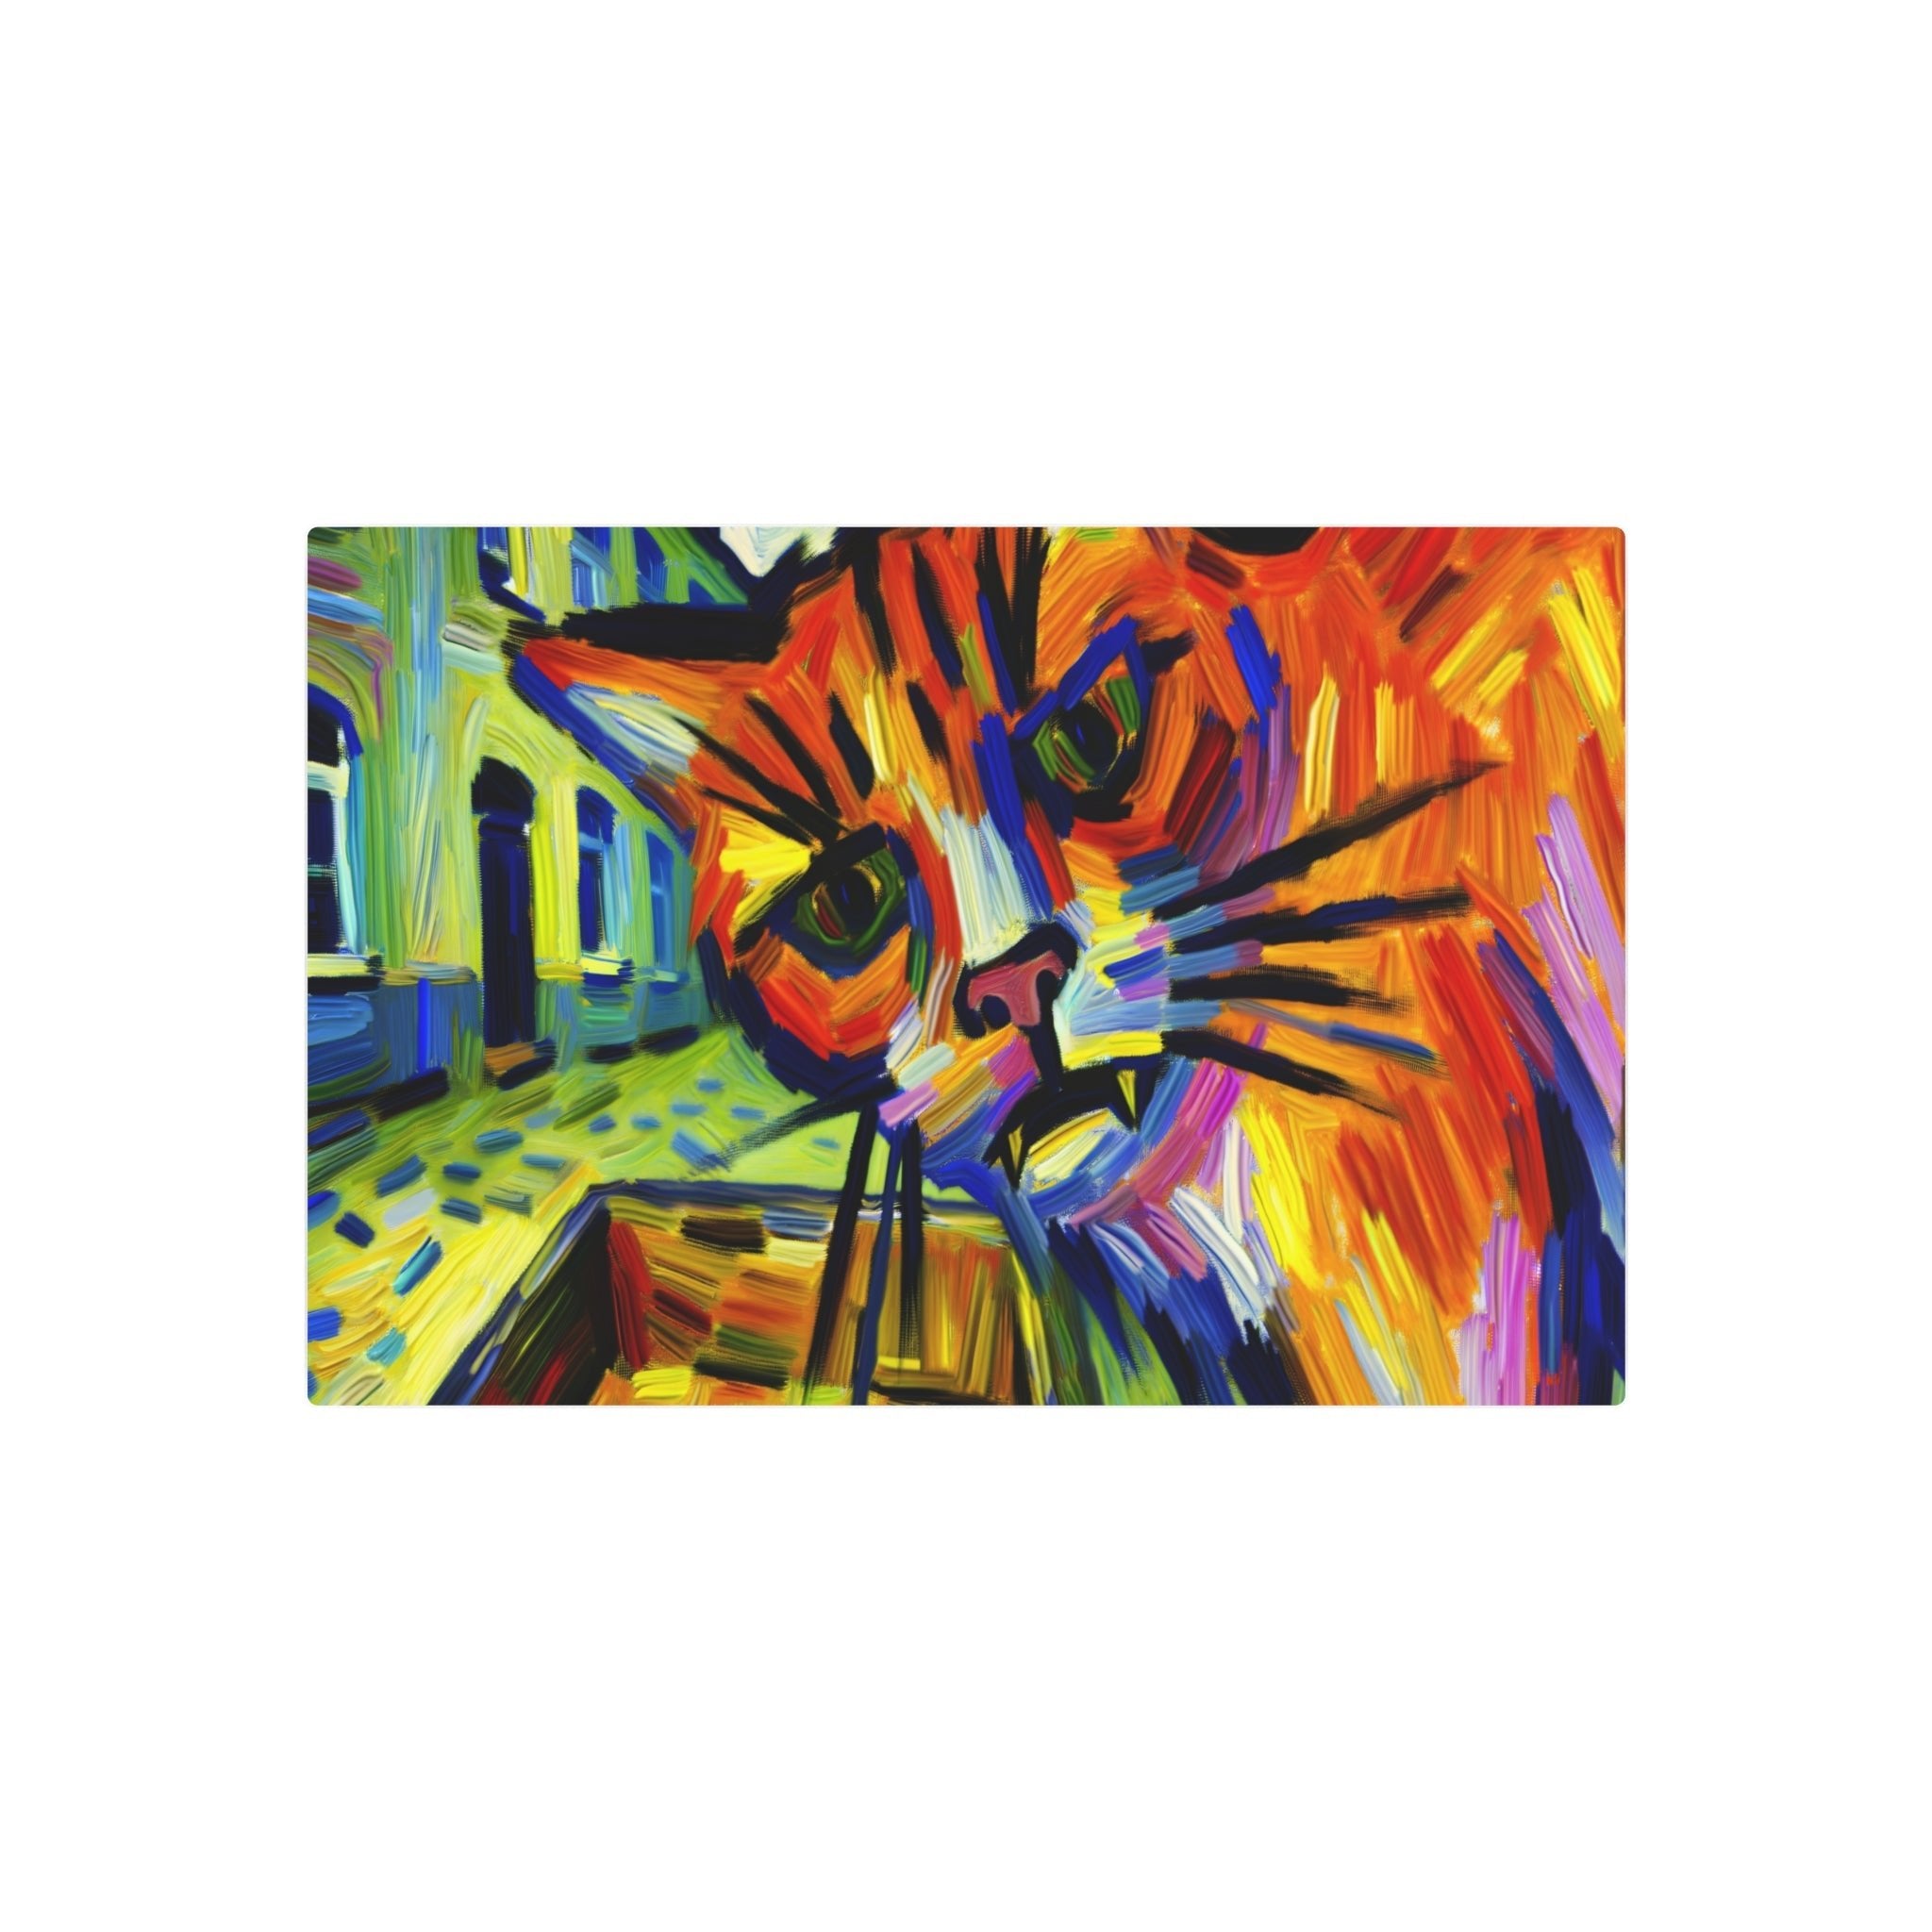 Metal Poster Art | "Expressionist Style Vividly Colored Cat Portrait in Urban Setting - Dramatic Western Art Expressionism" - Metal Poster Art 30″ x 20″ (Horizontal) 0.12''